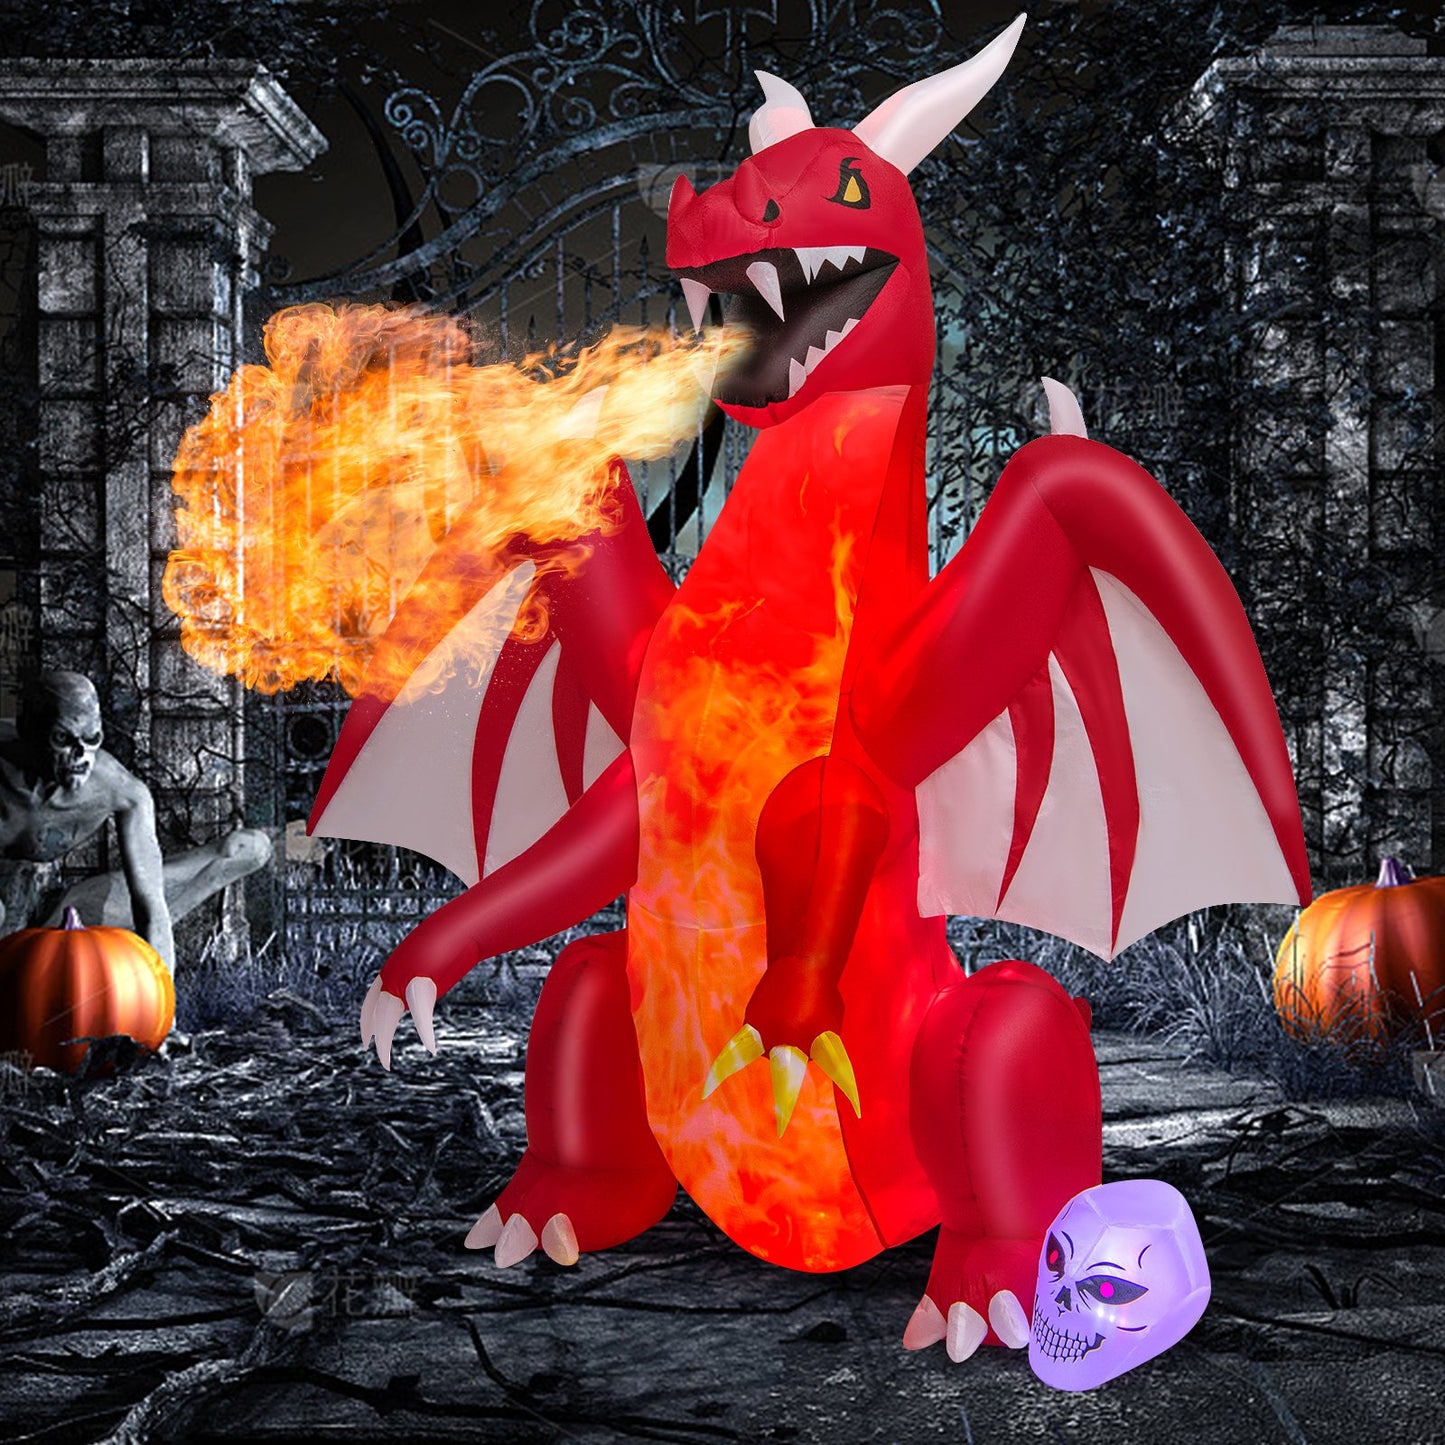 8 Feet Halloween Inflatables Blow-up Red Dragon with Wings Skull, Red